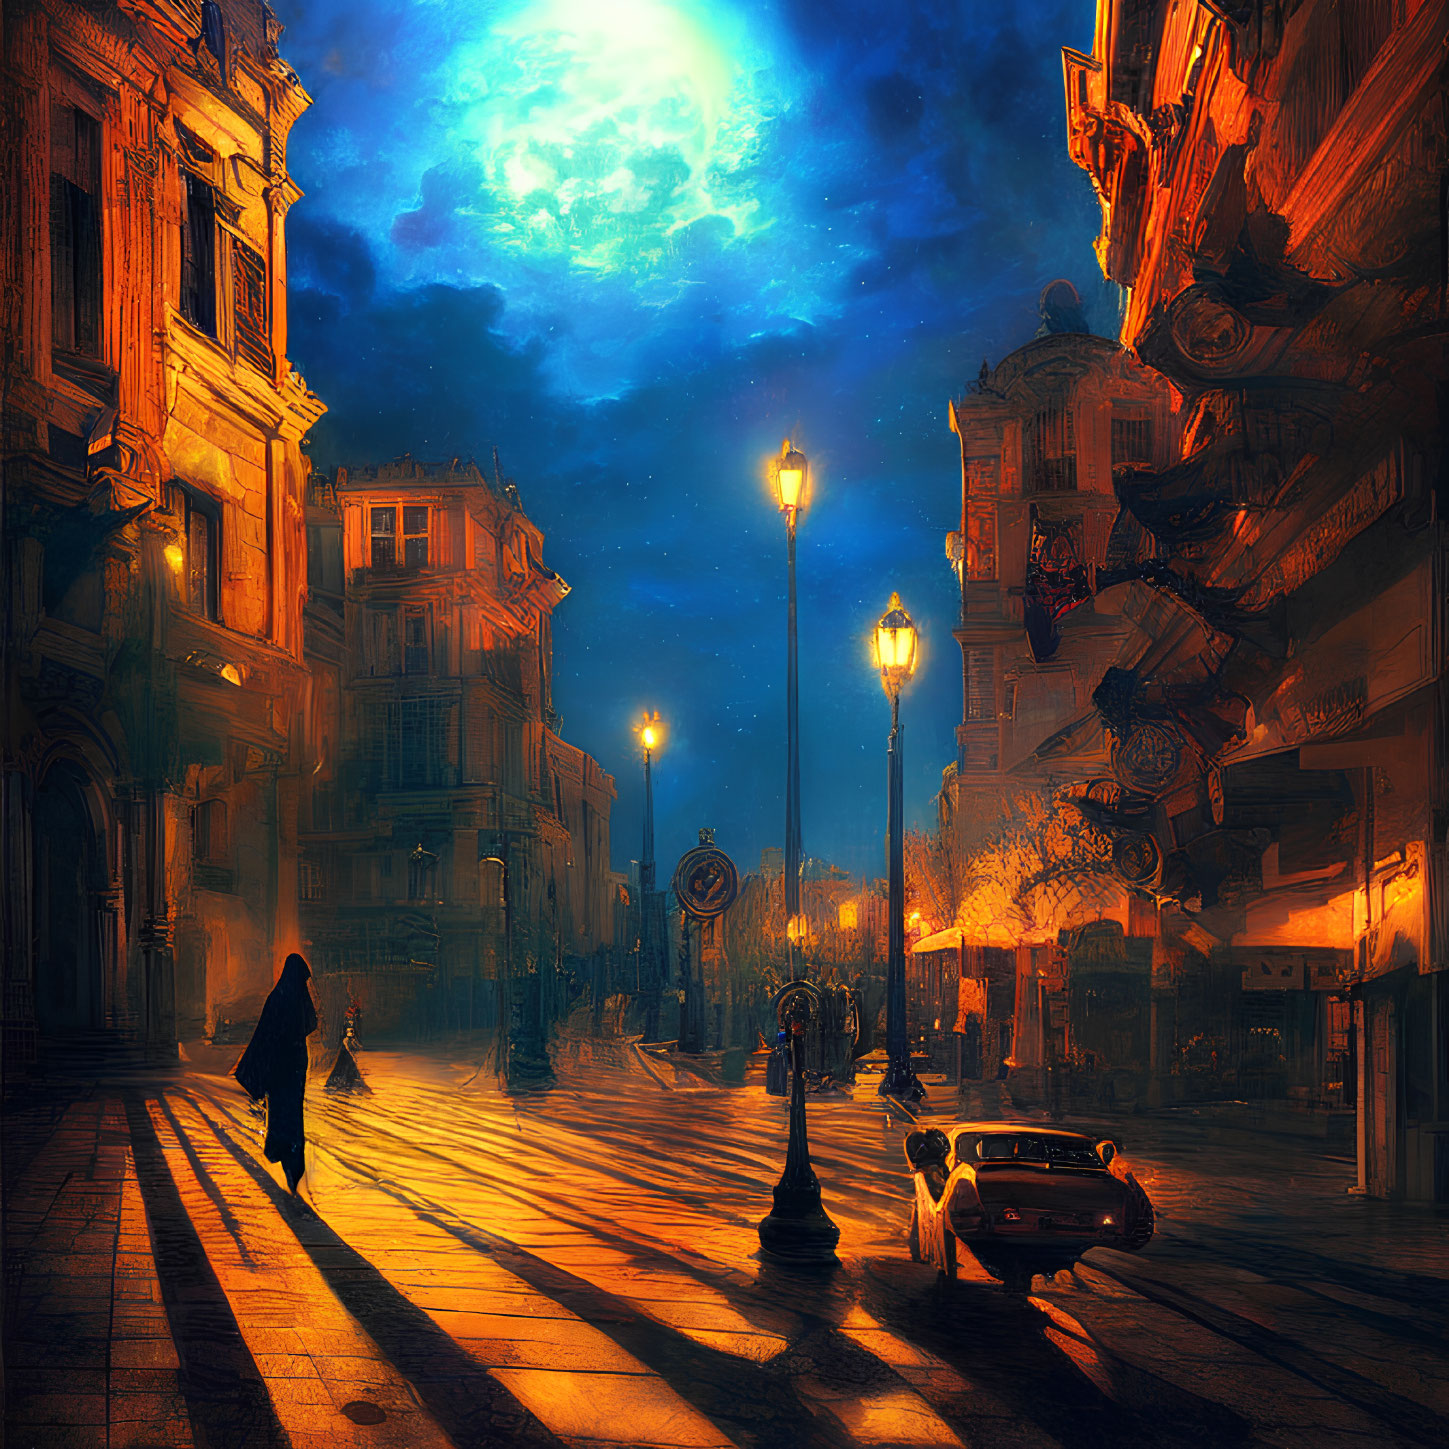 Moonlit cobblestone street with vintage car and person silhouette.